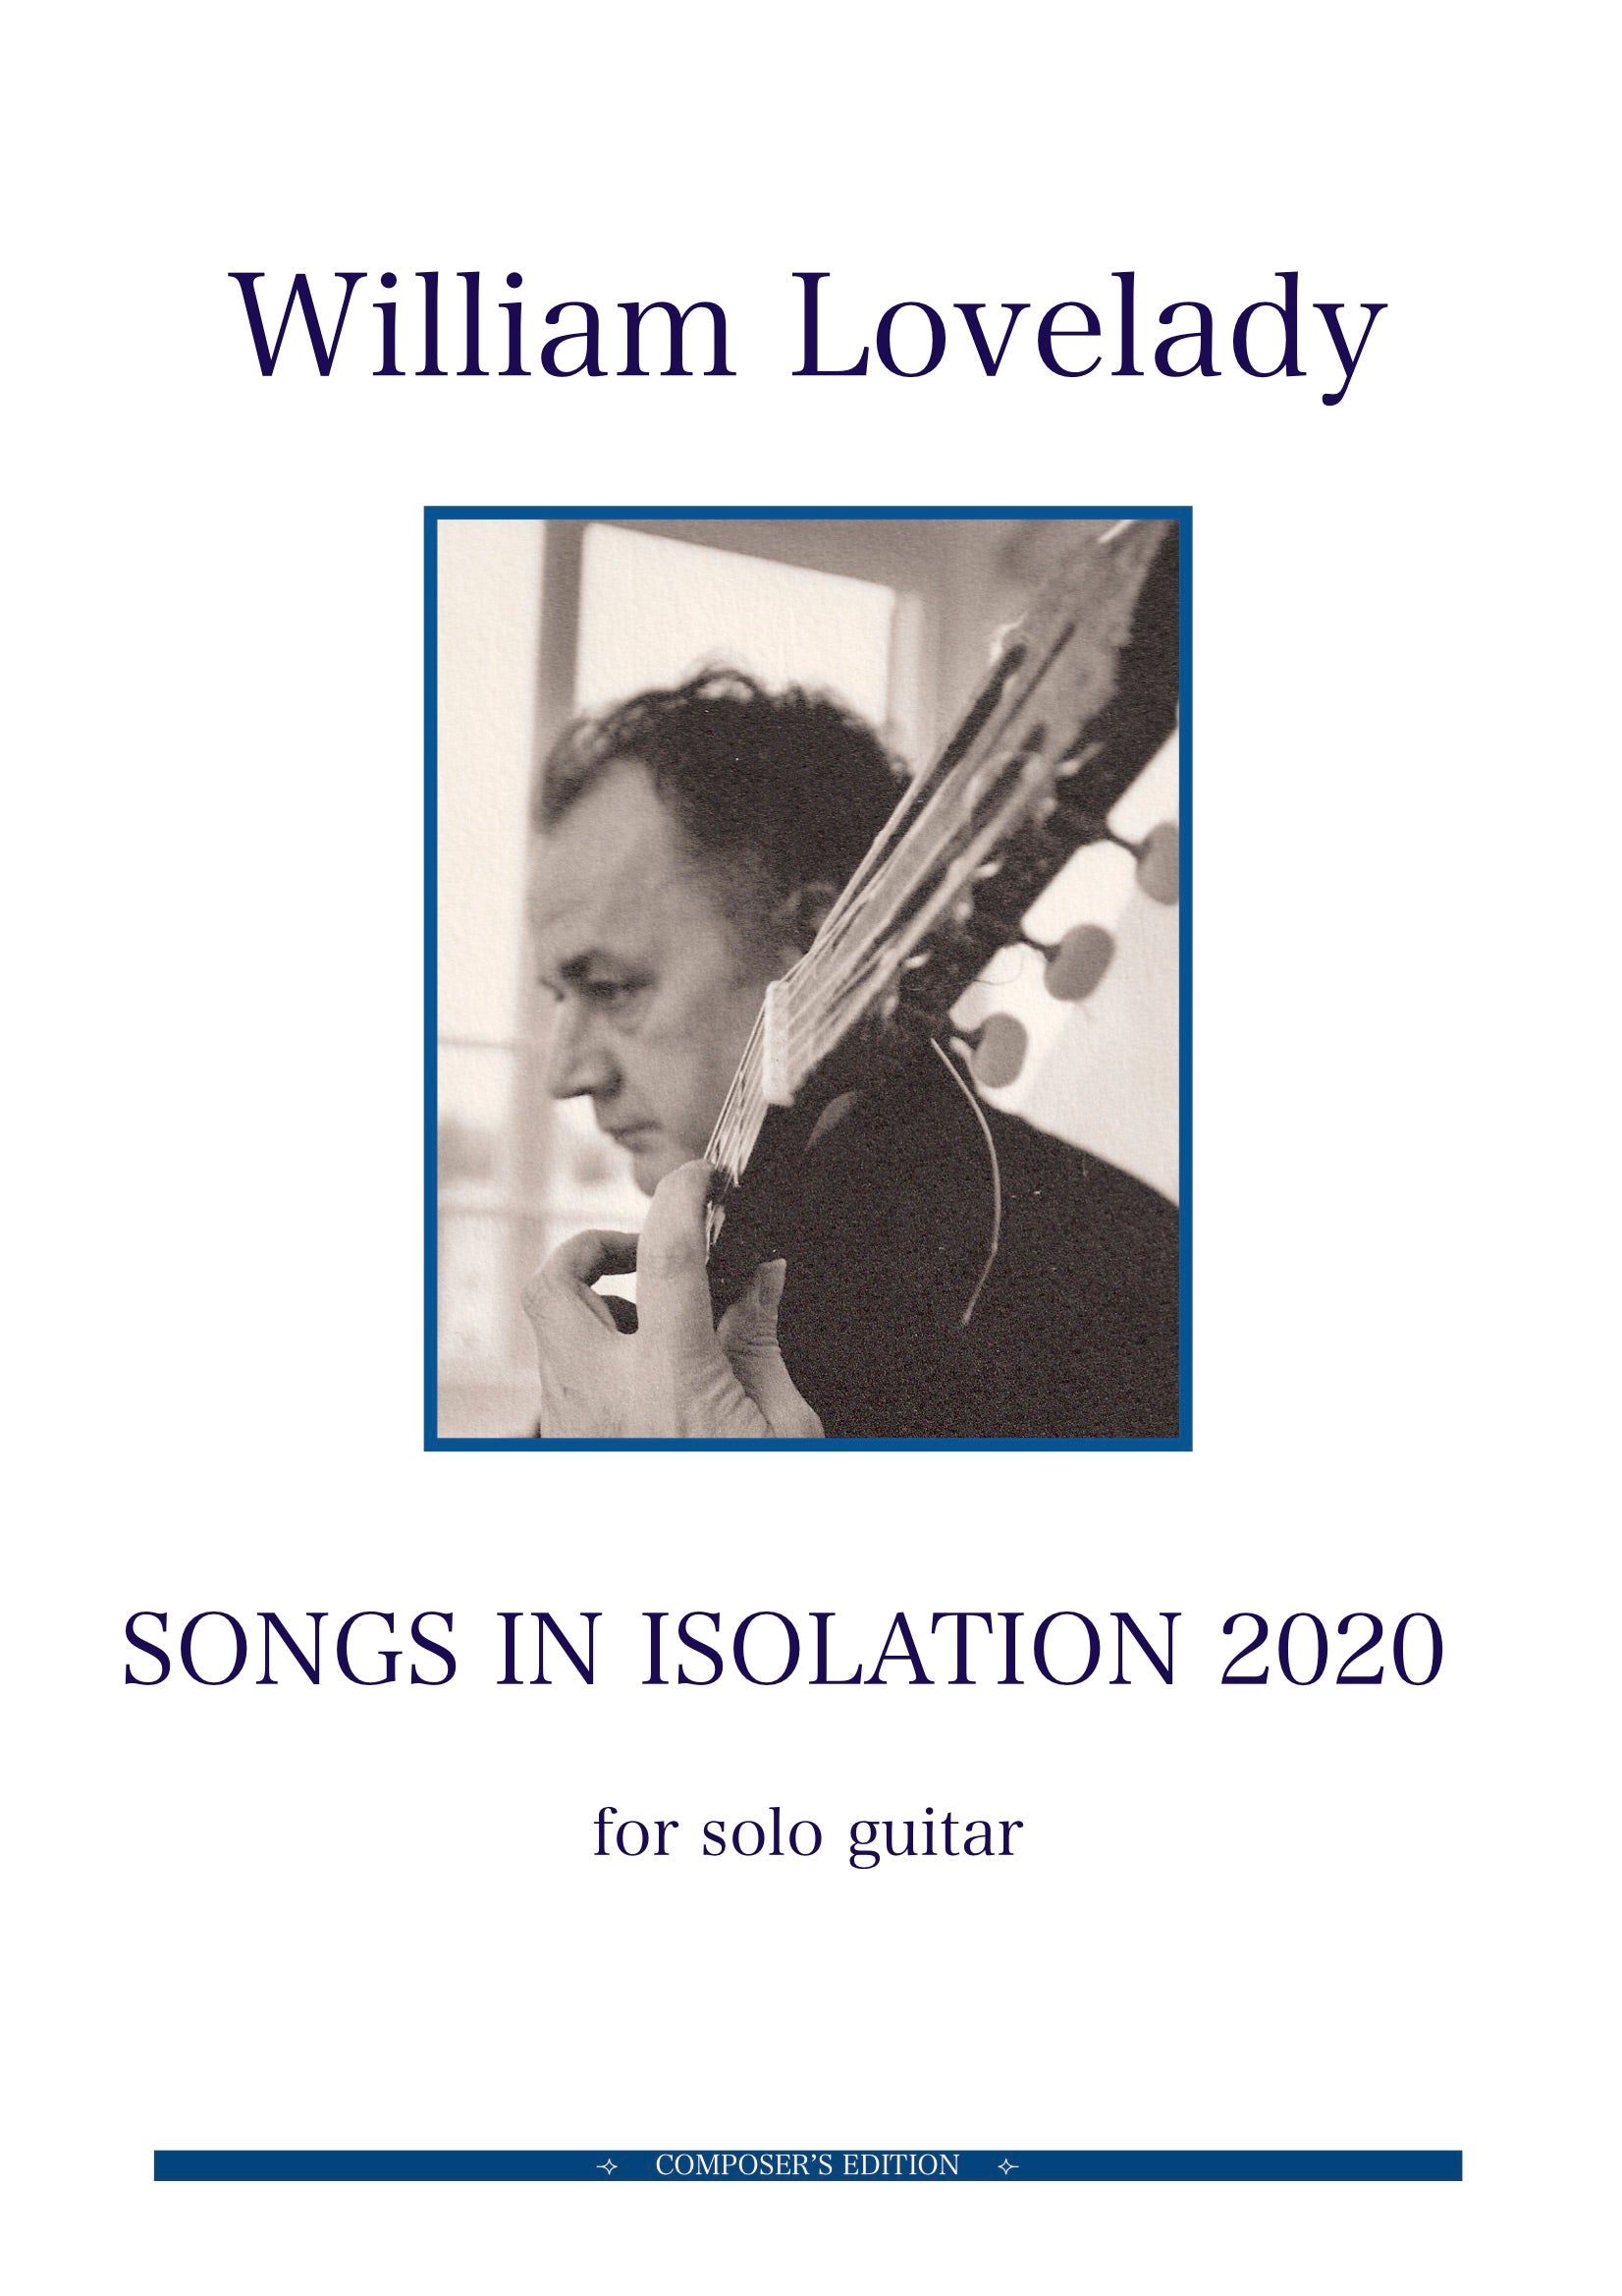 Songs in Isolation 2020